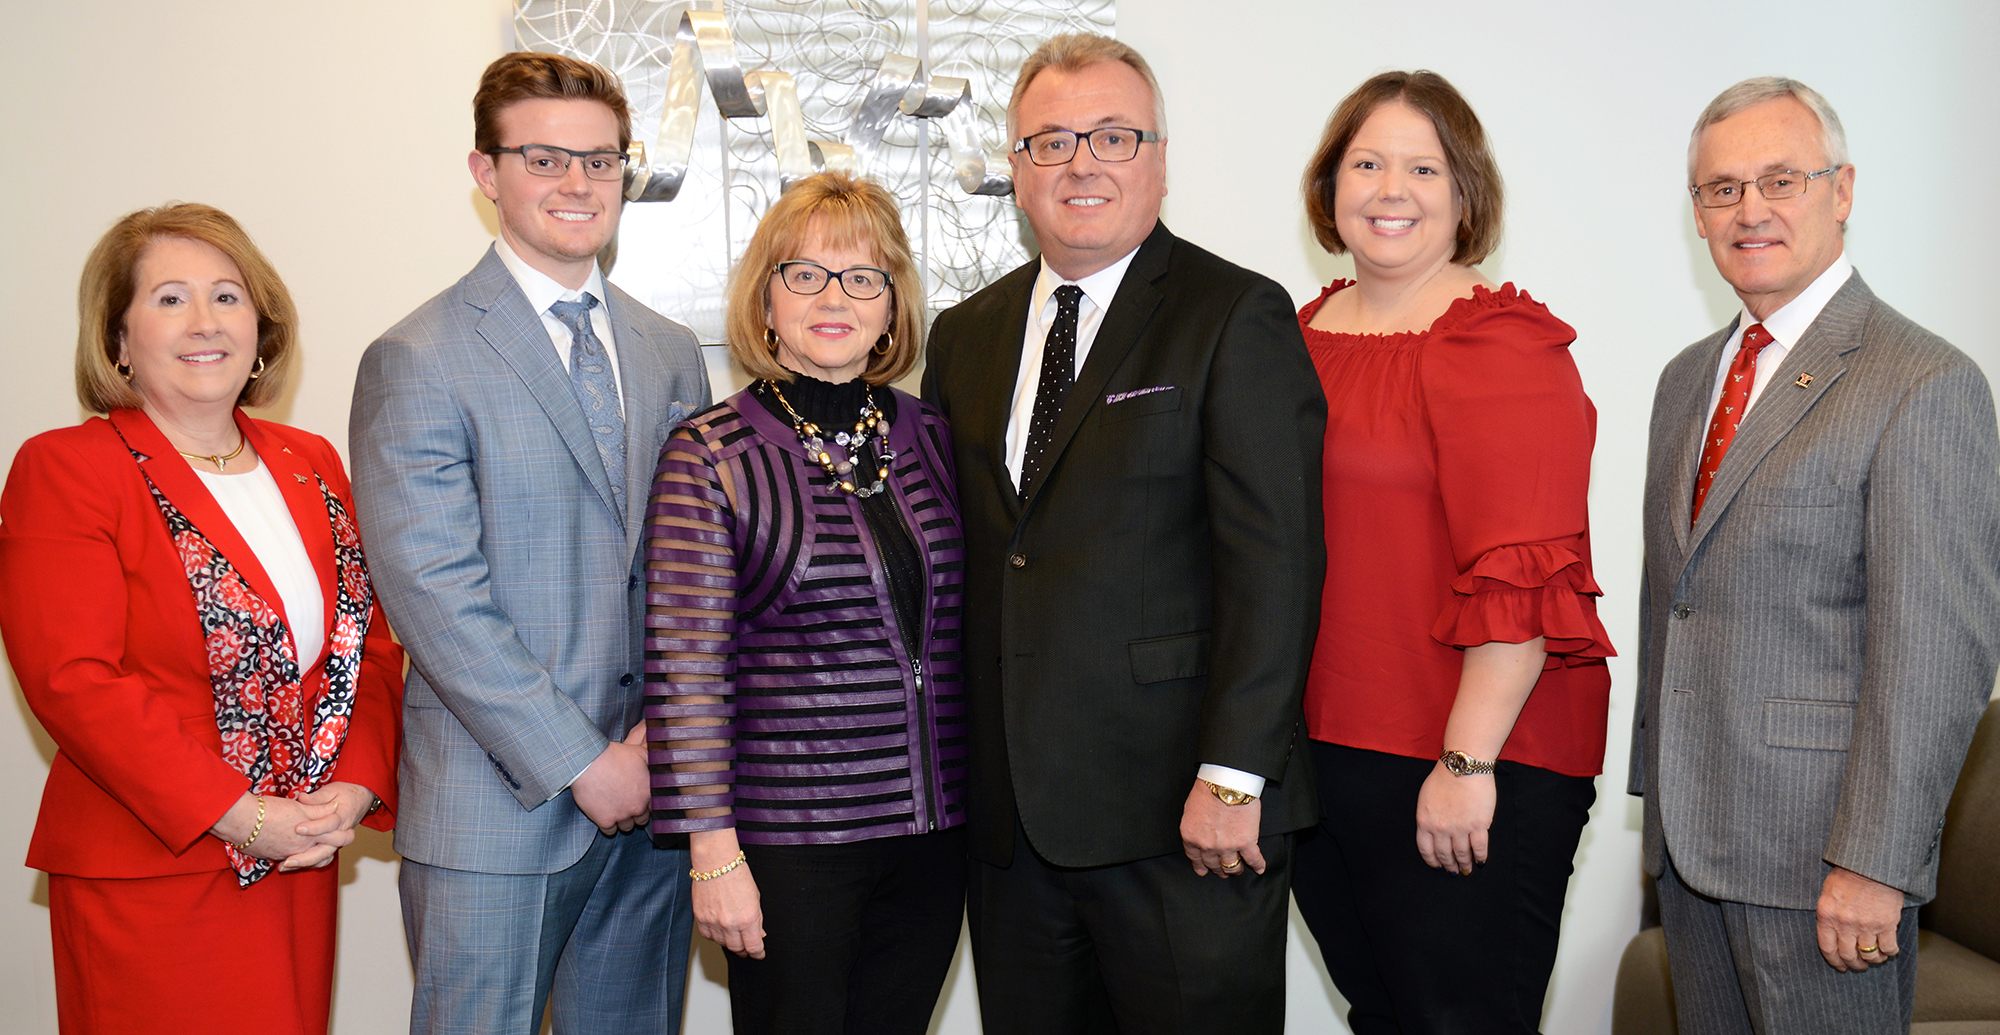 From the left are Betty Jo Licata, dean of the YSU Williamson College of Business Administration; members of the Mrozek family - Matthew, Wanda, Garry and Stephanie; and YSU President Jim Tressel